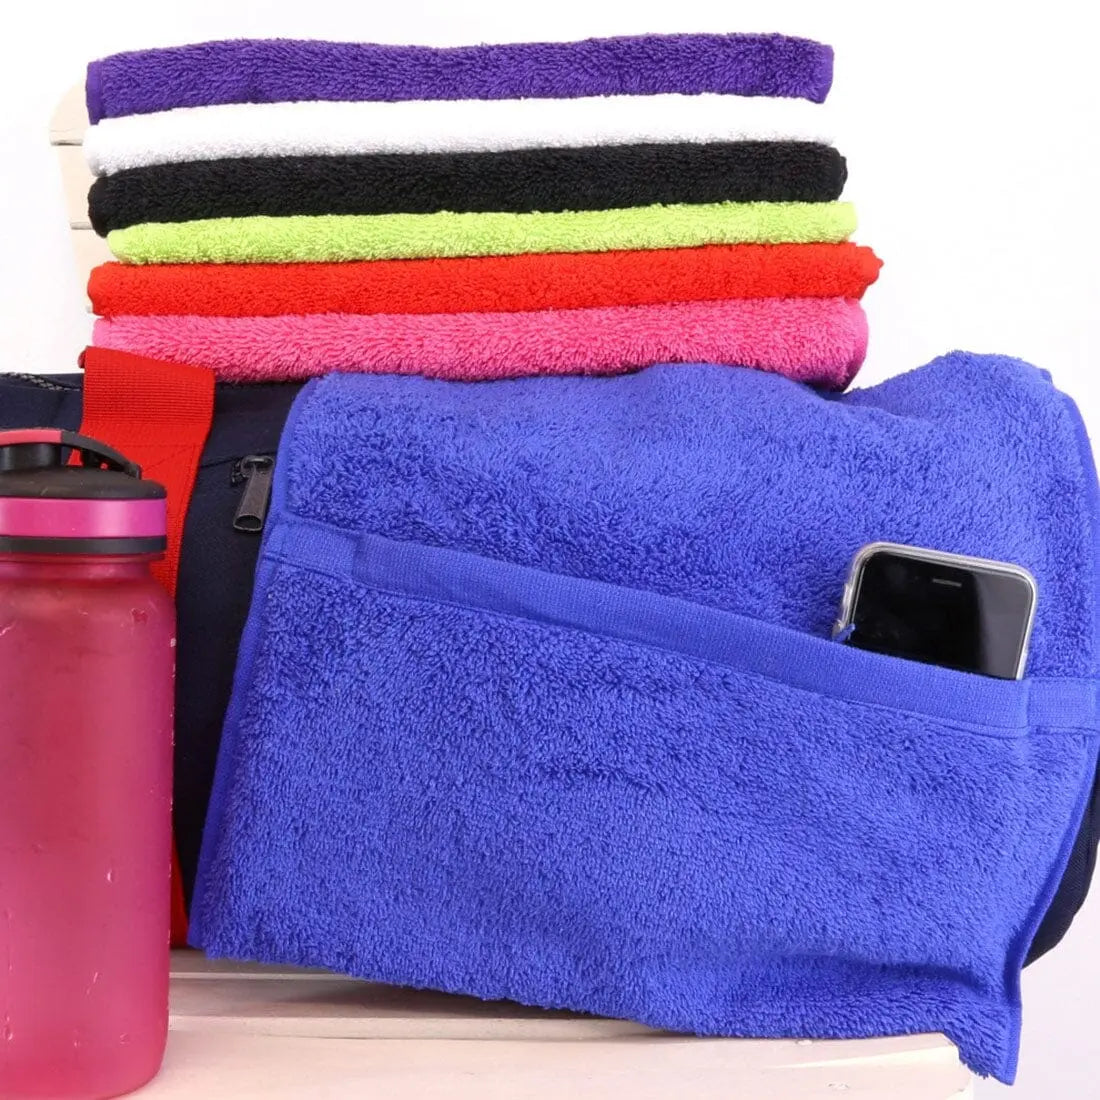 Microfiber Gym Towels For Sweat, Yoga Sweat Towel For Home Gym, Microfiber  Workout Towels For Gym, 13 Inch X 29 Inch, 2 Articles